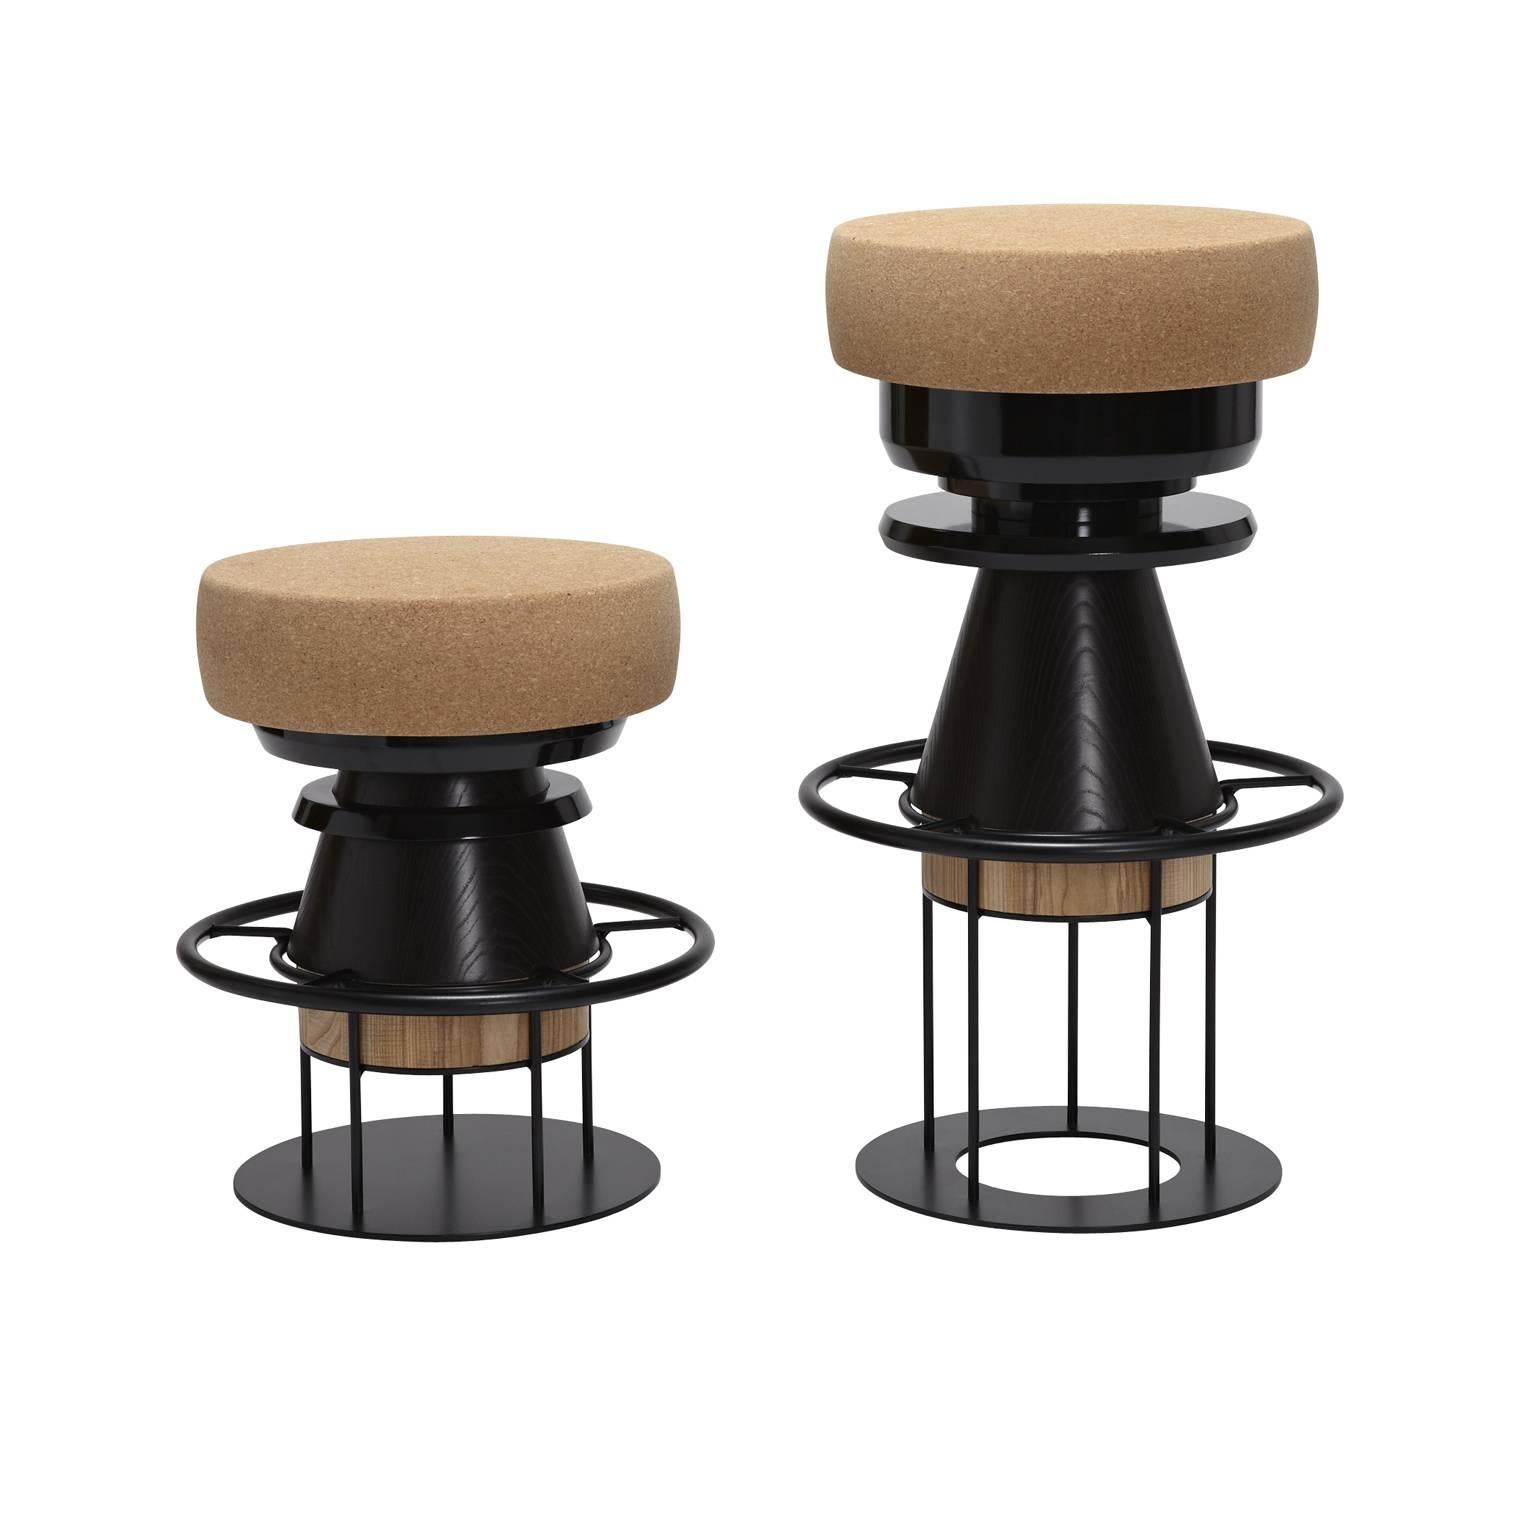 Tembo is a stool made of stacked pieces of wood, metal, and cork. This ‘modern TOTEM’ has a playful and bulky aspect recalling children’s toys and African tam-tam (Tembo means elephant foot in Swahili).
Note Design Studio is a collective of